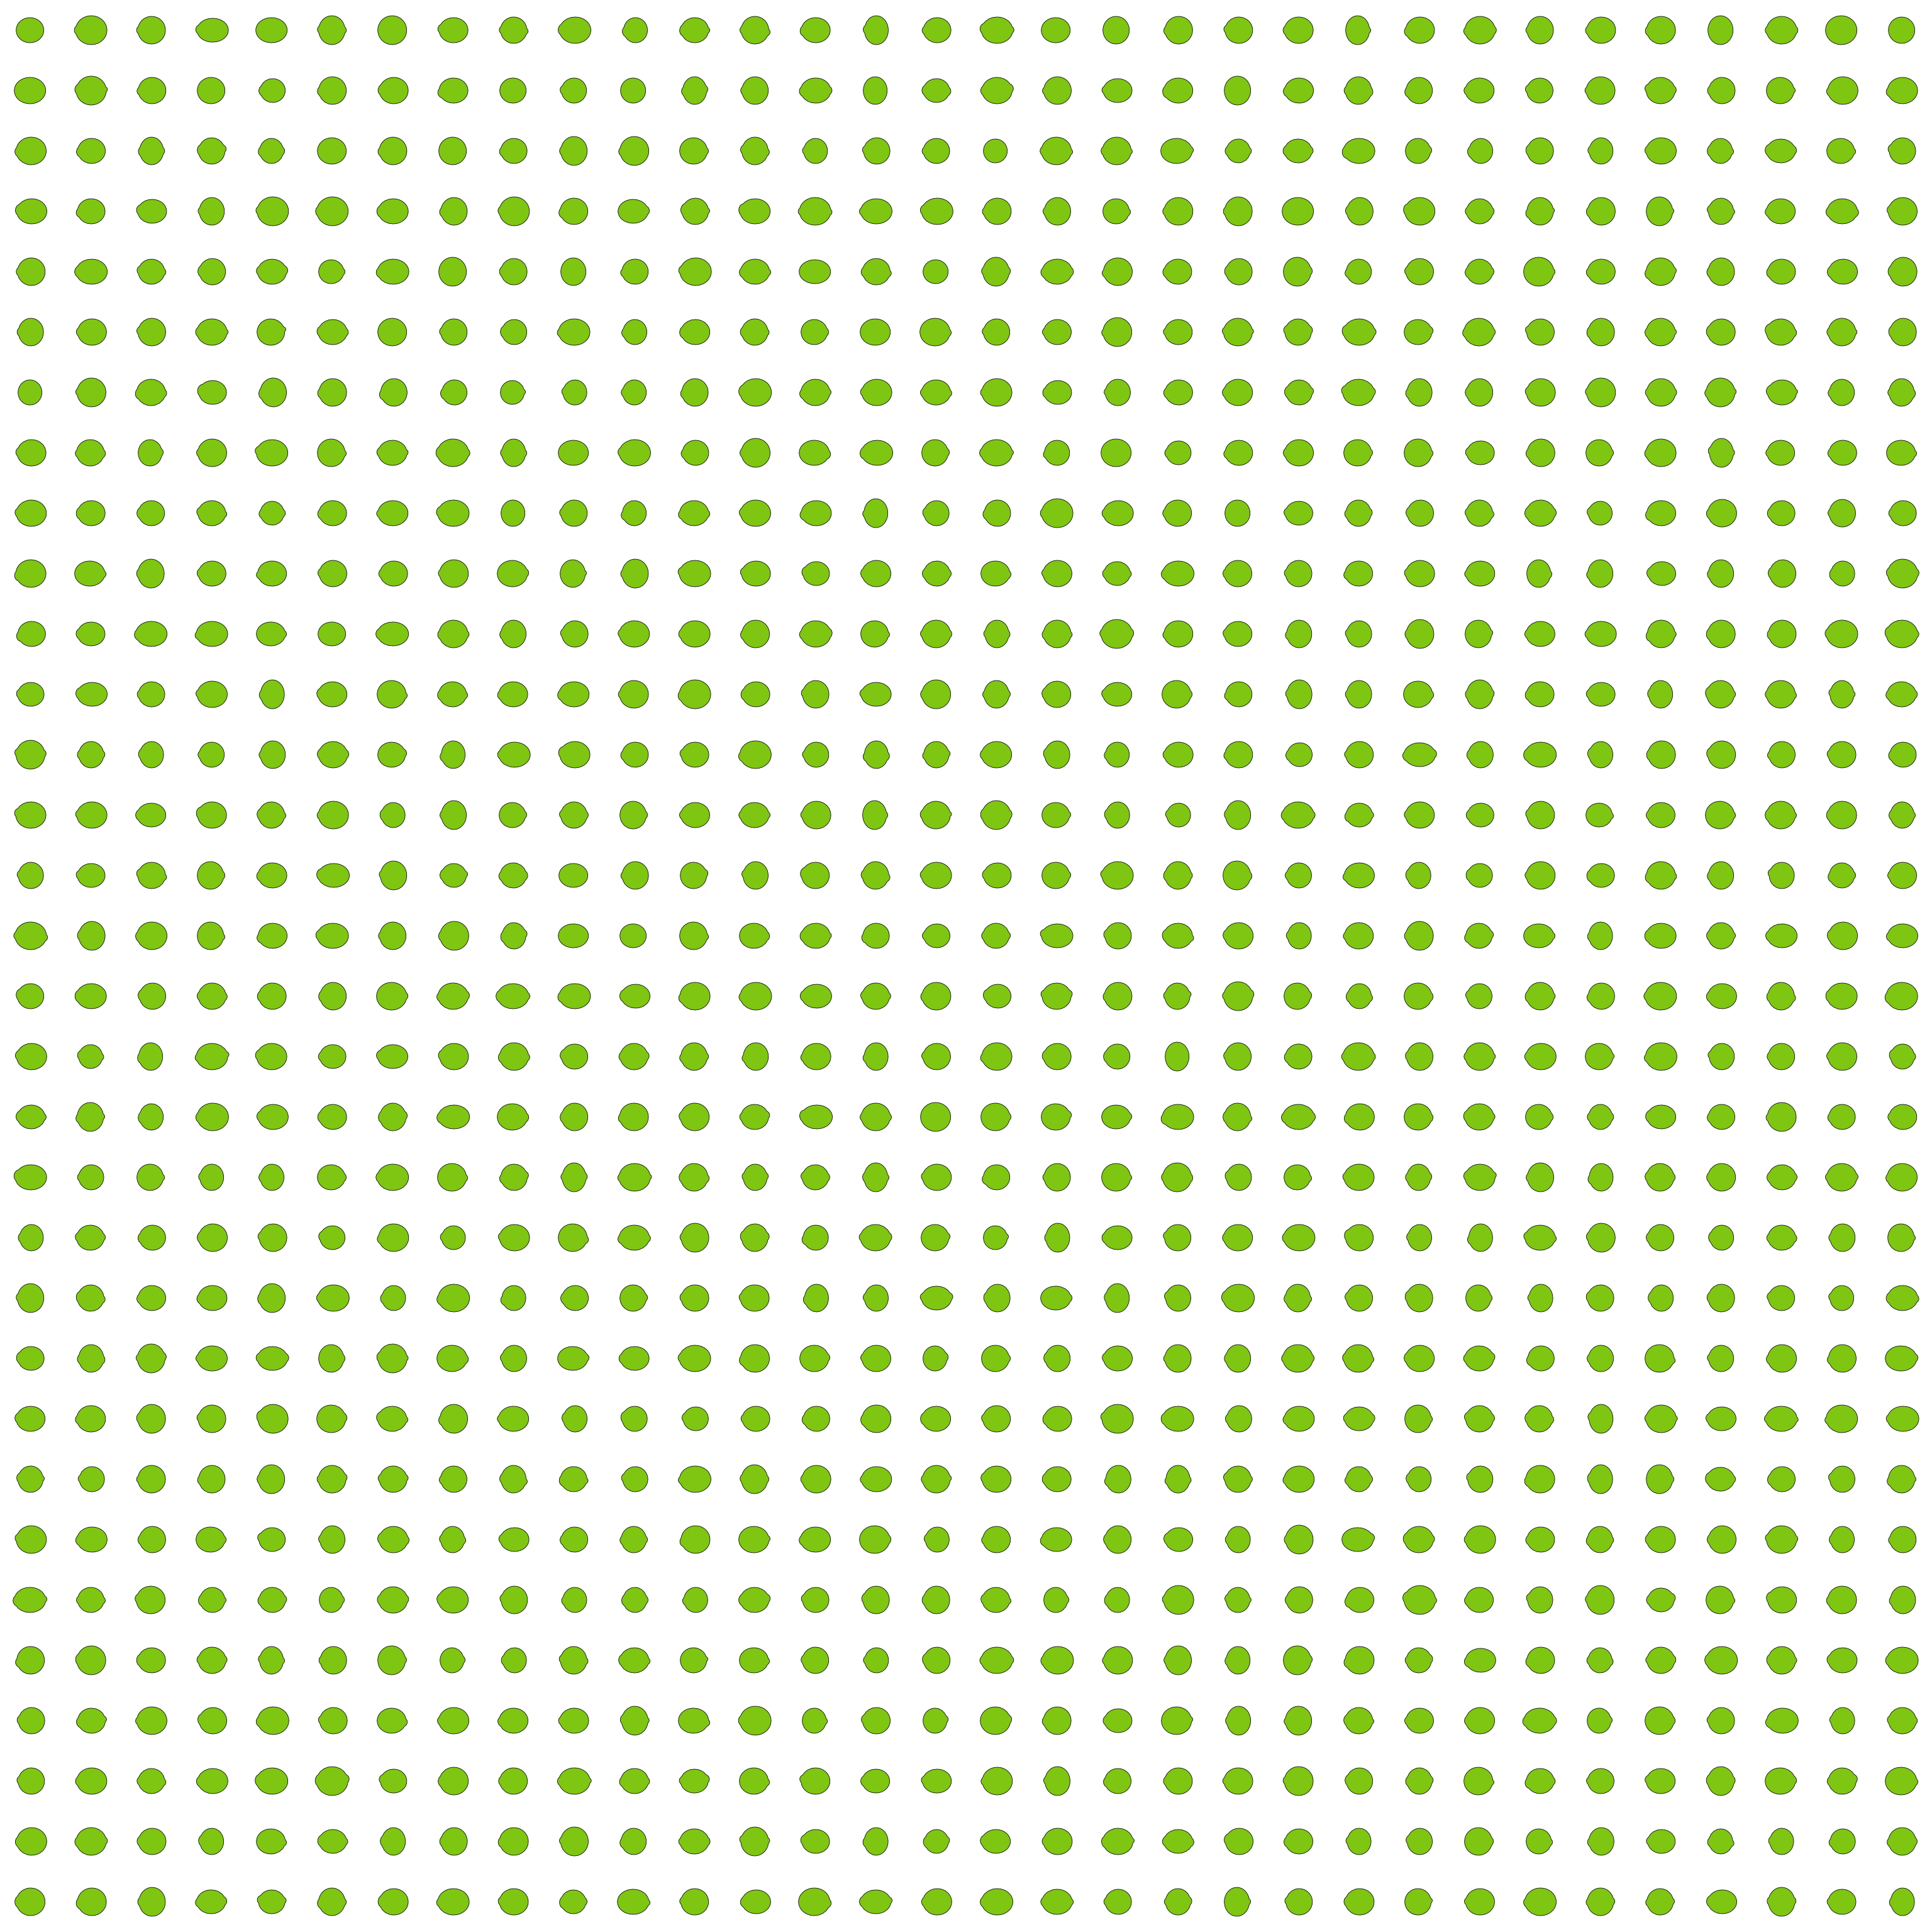 A grid of small illustrations of green limes.